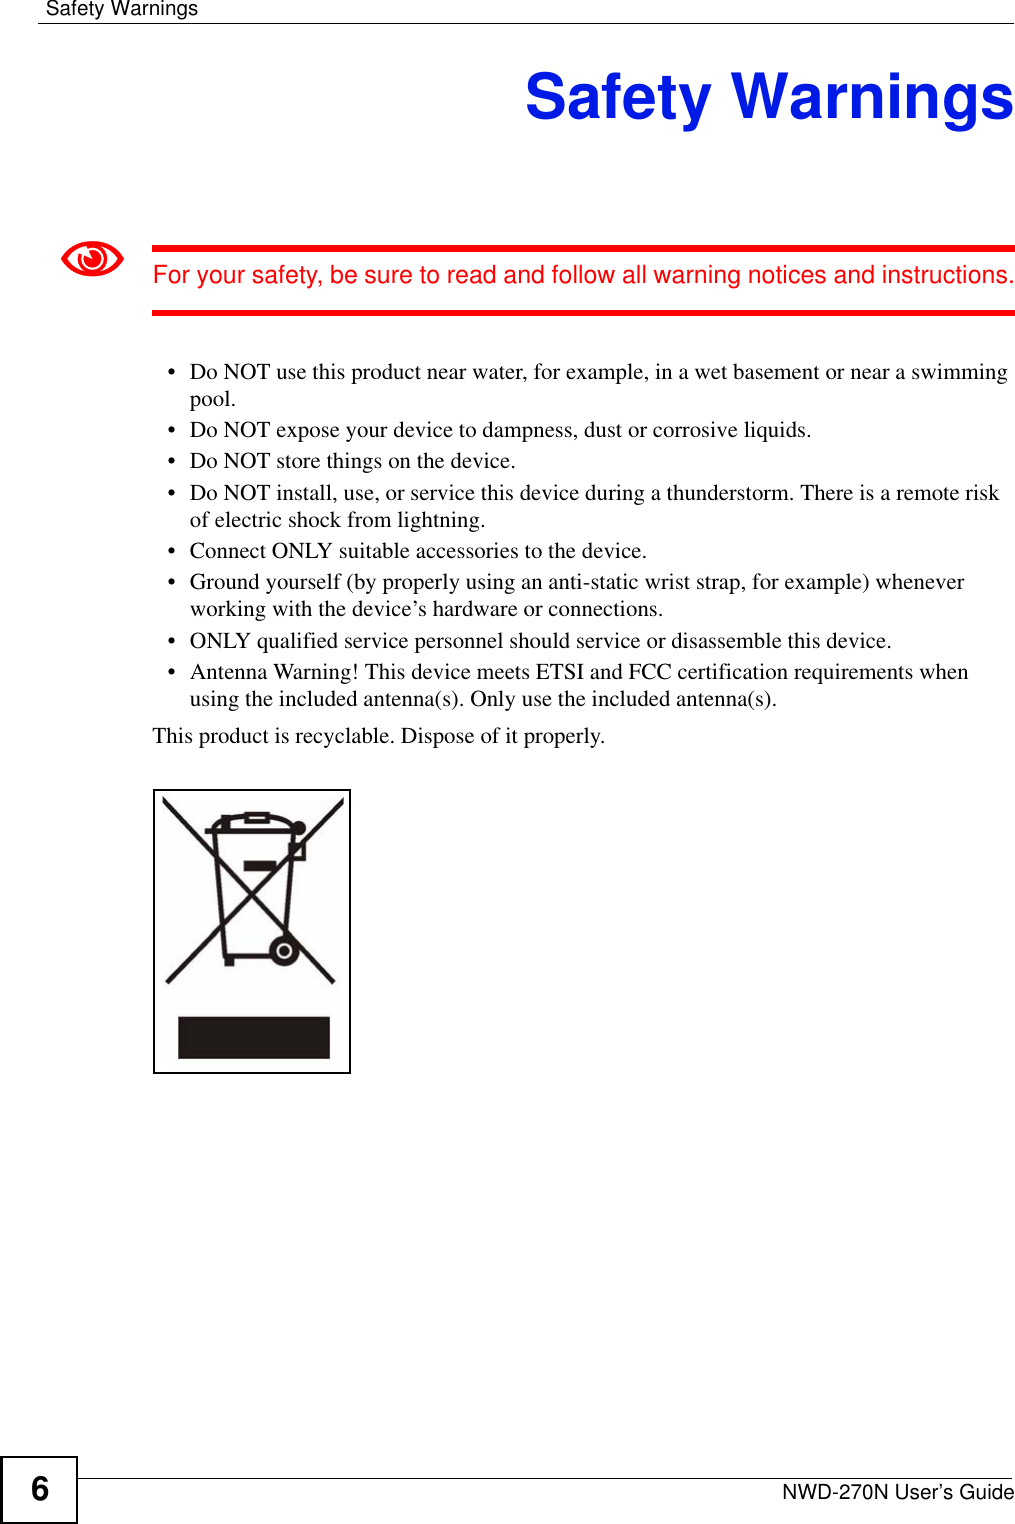 Safety WarningsNWD-270N User’s Guide6Safety Warnings1For your safety, be sure to read and follow all warning notices and instructions.• Do NOT use this product near water, for example, in a wet basement or near a swimming pool.• Do NOT expose your device to dampness, dust or corrosive liquids.• Do NOT store things on the device.• Do NOT install, use, or service this device during a thunderstorm. There is a remote risk of electric shock from lightning.• Connect ONLY suitable accessories to the device.• Ground yourself (by properly using an anti-static wrist strap, for example) whenever working with the device’s hardware or connections.• ONLY qualified service personnel should service or disassemble this device.• Antenna Warning! This device meets ETSI and FCC certification requirements when using the included antenna(s). Only use the included antenna(s).This product is recyclable. Dispose of it properly.  